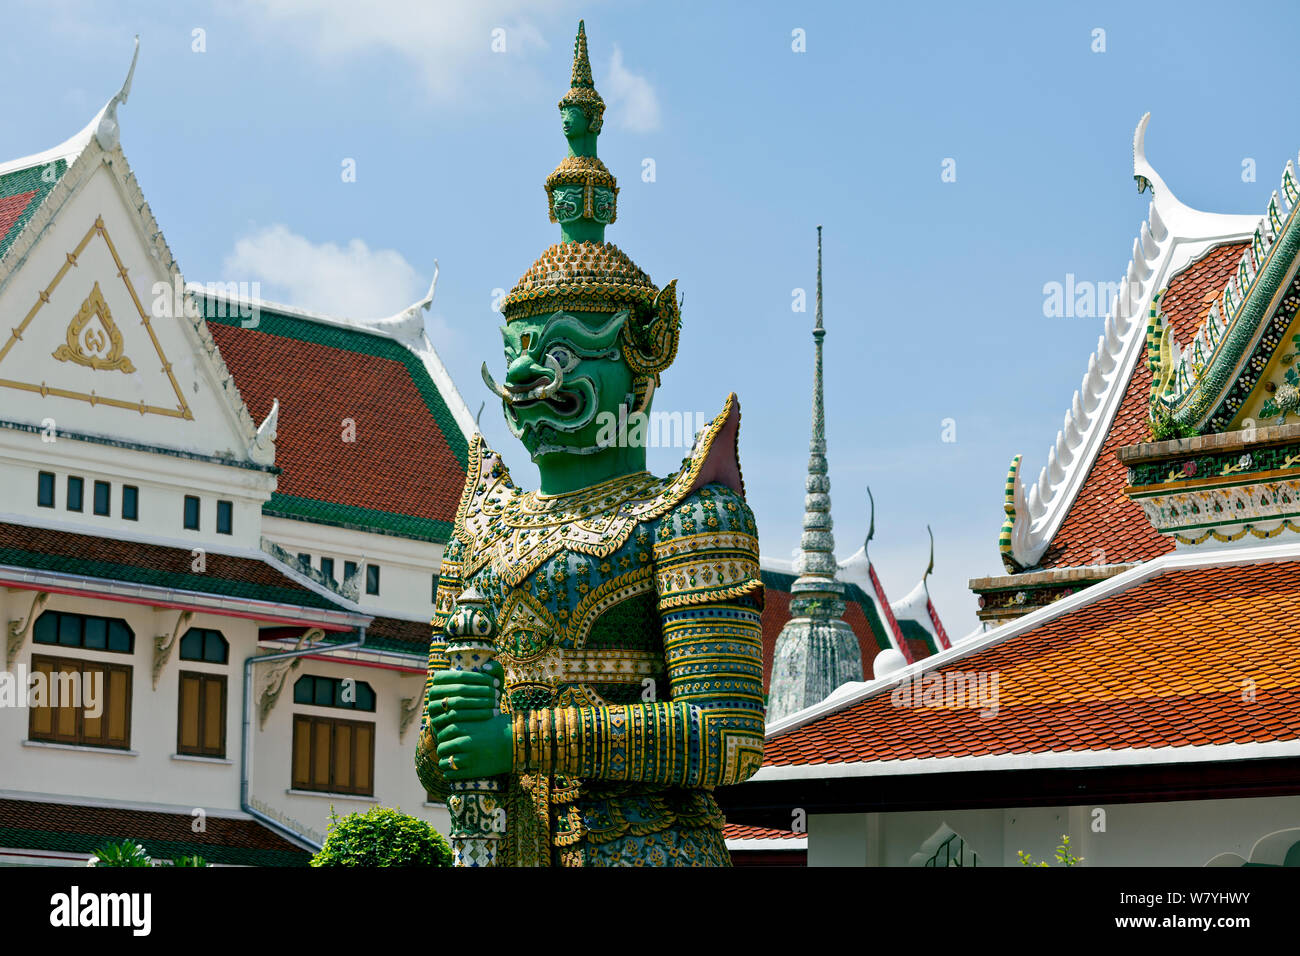 Temple figure and roof lines at Wat Arun in Bangkok. Thailand, September 2014. Stock Photo